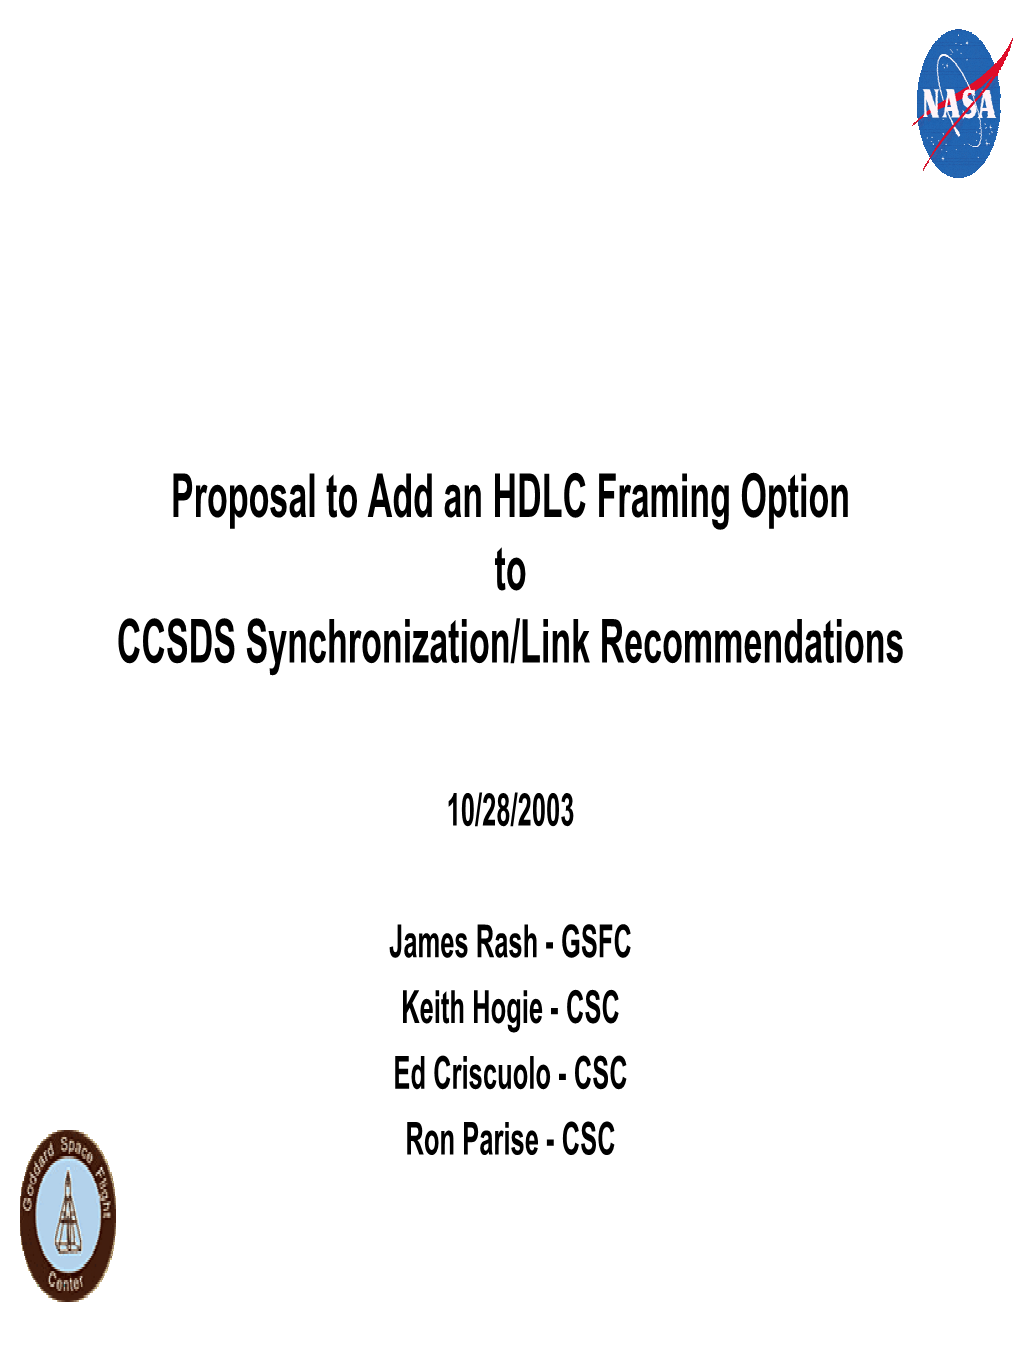 Proposal to Add an HDLC Framing Option to CCSDS Synchronization/Link Recommendations